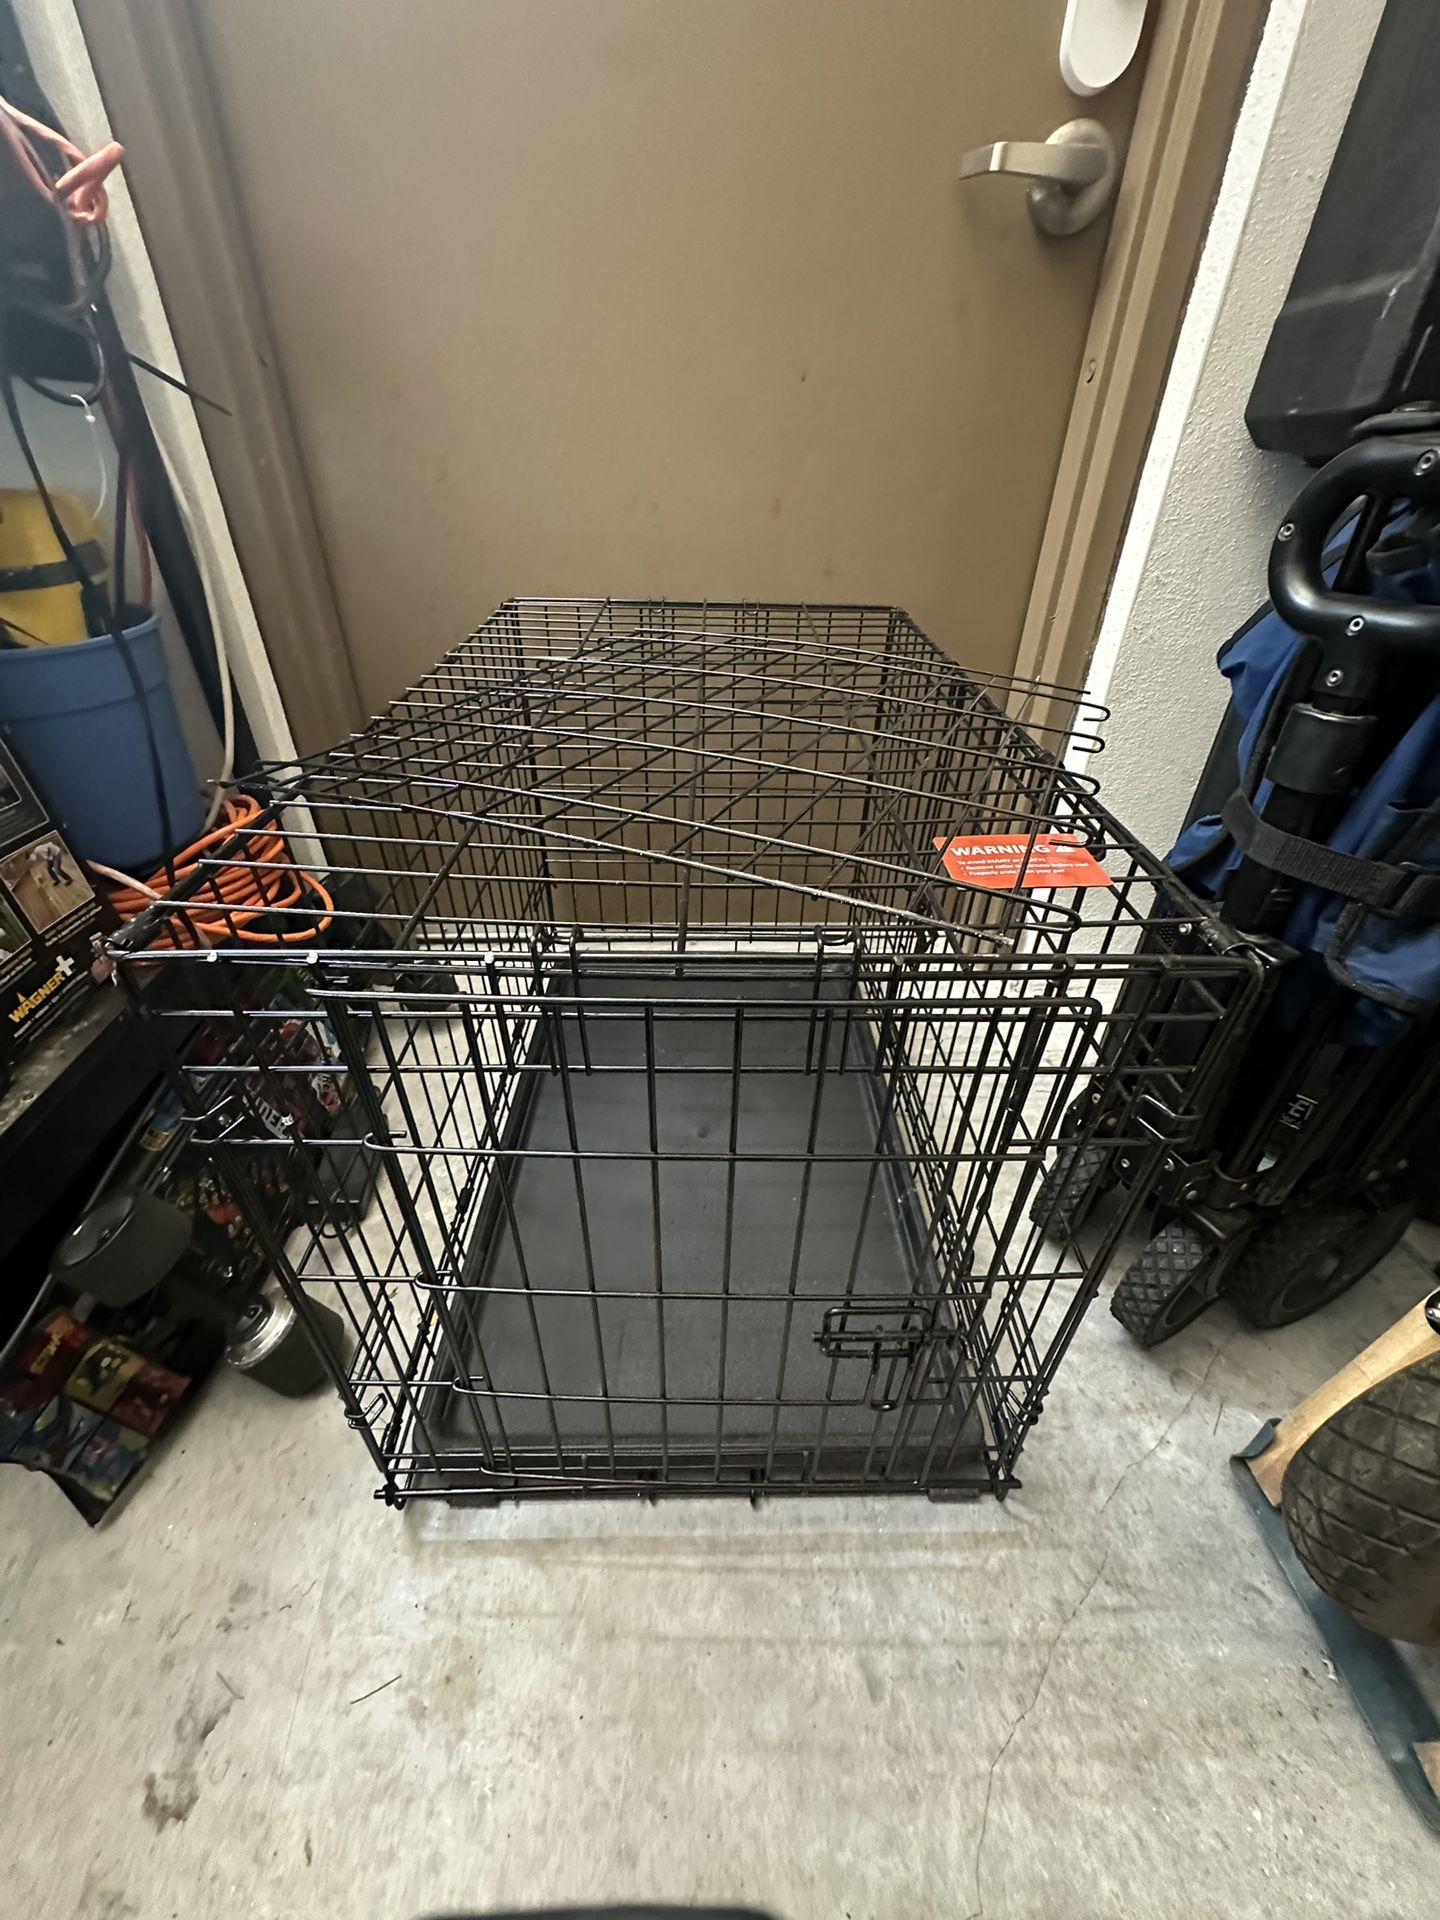 30”L X 19”W X 21” H - Folding Metal Dog Cage With Two Doors And Separation 